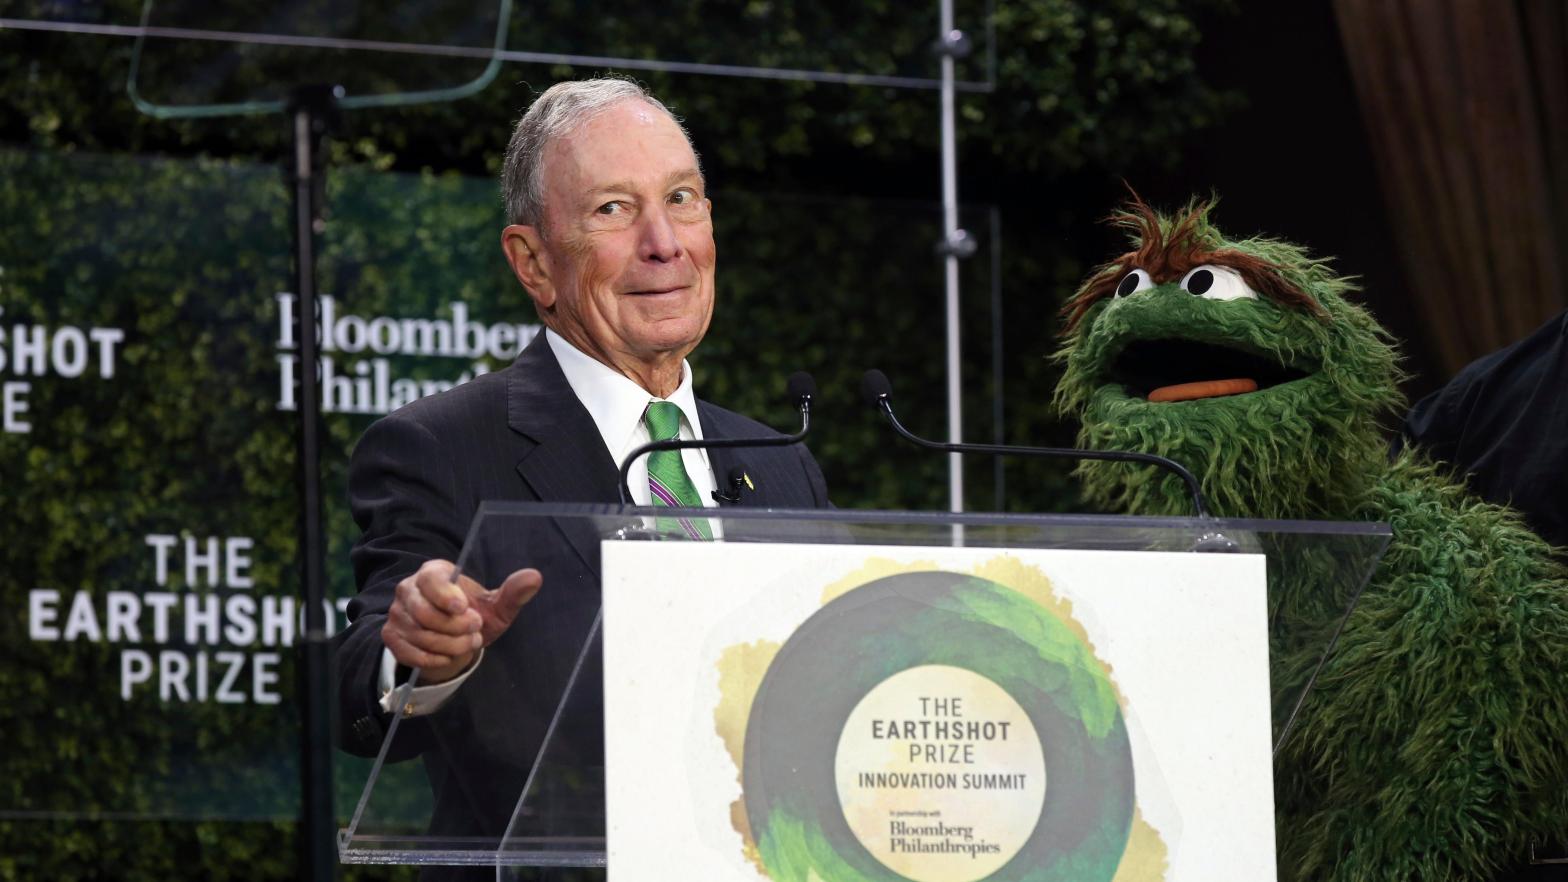 Bloomberg poses with Oscar the Grouch during a summit in New York City on Wednesday. (Photo: Bruce Gilbert, AP)